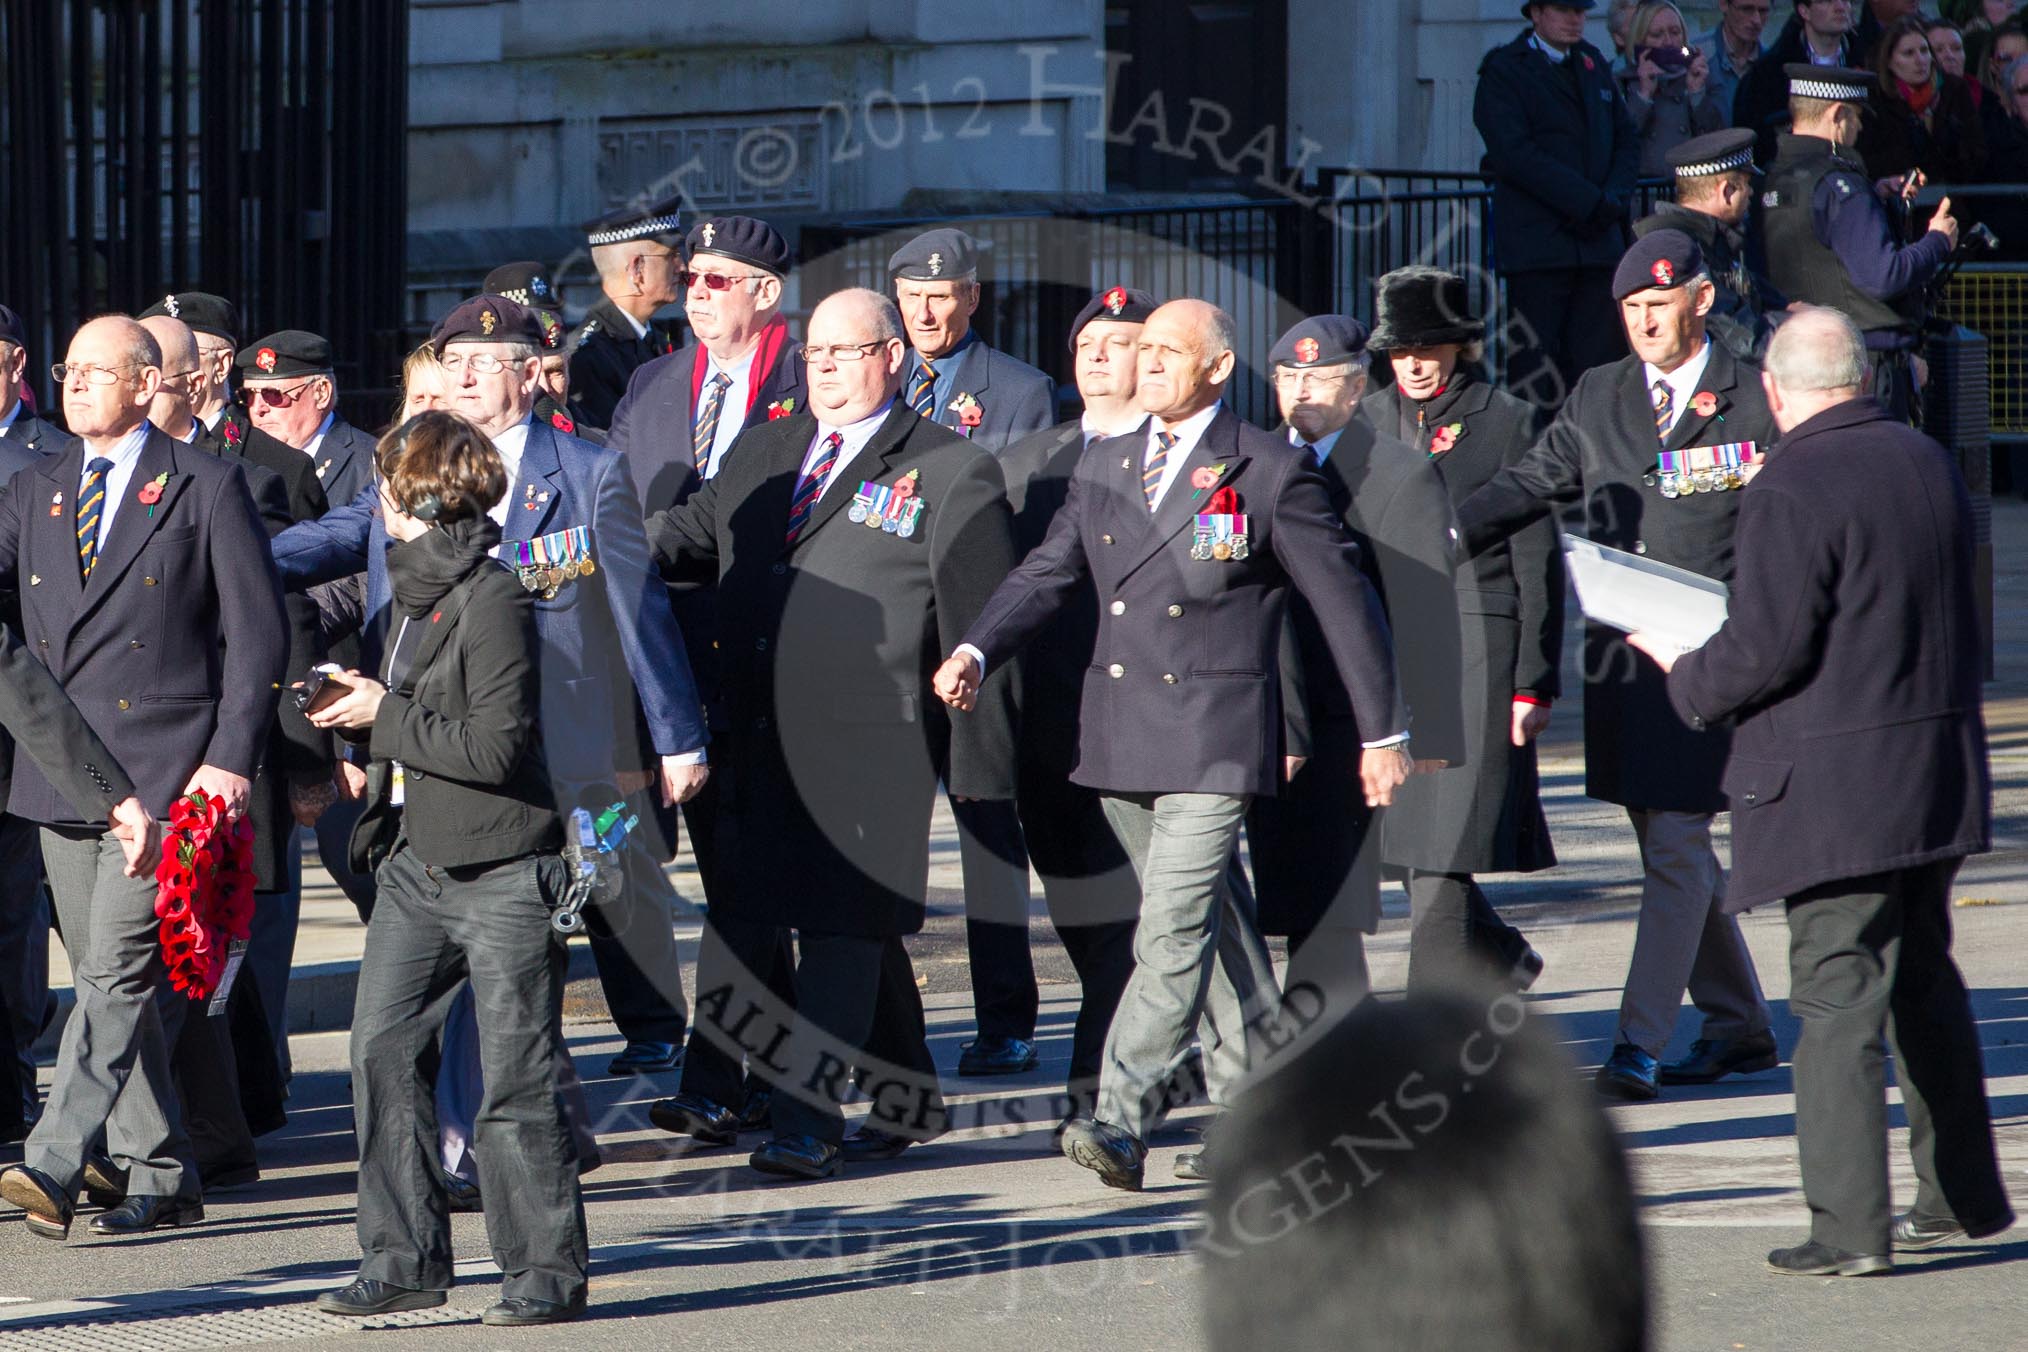 Remembrance Sunday 2012 Cenotaph March Past: Group B2, Royal Electrical & Mechanical Engineers Association..
Whitehall, Cenotaph,
London SW1,

United Kingdom,
on 11 November 2012 at 11:54, image #810